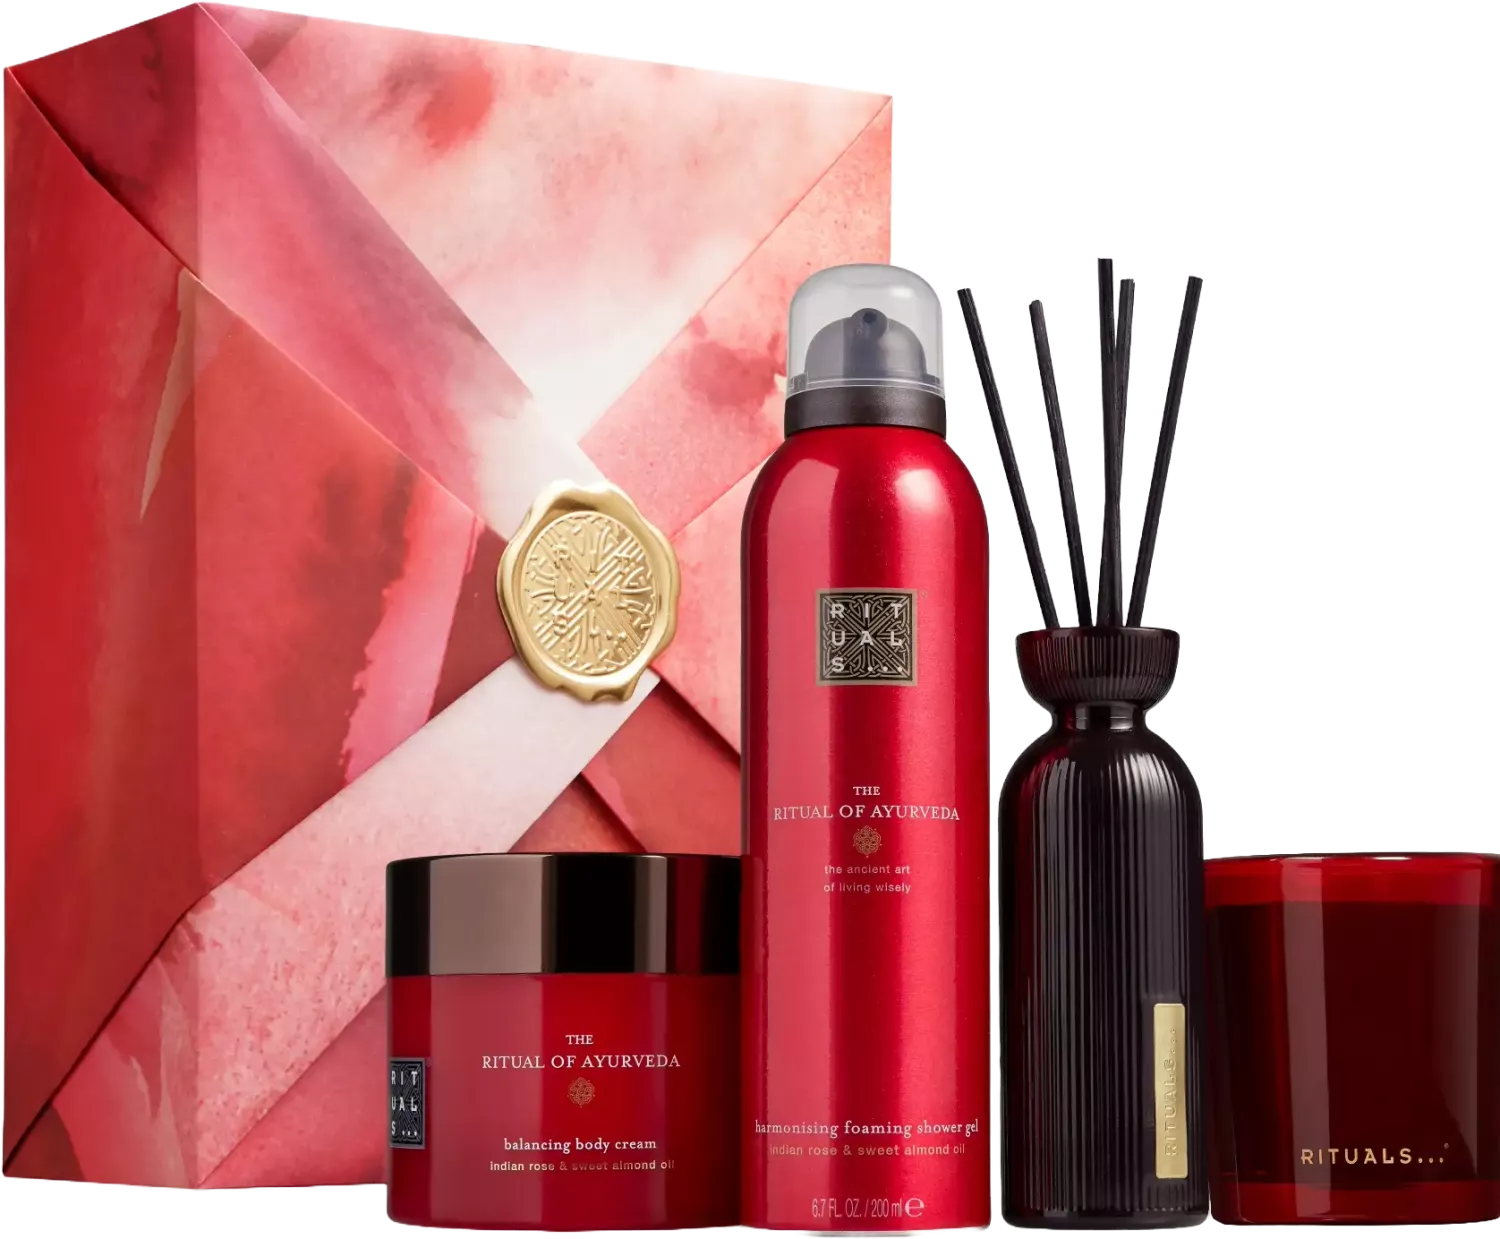 RITUALS The Ritual of Karma Small Gift Set - Compare Prices & Where To Buy  